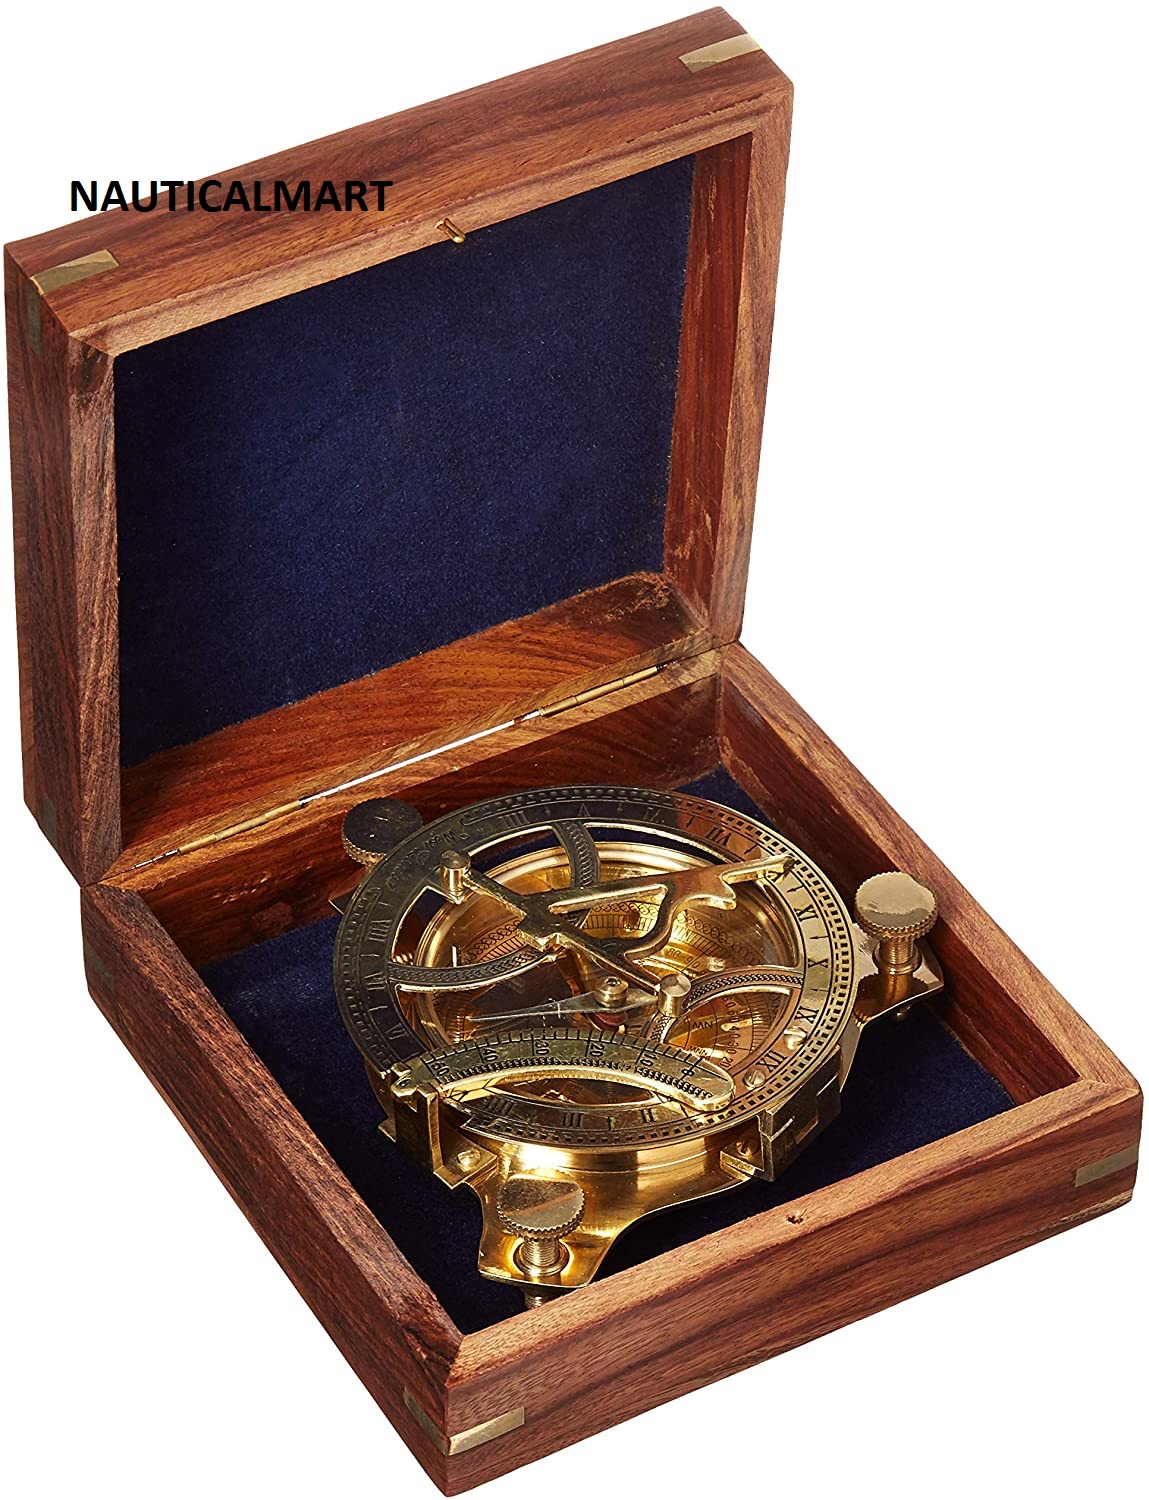 NauticalMart Solid Brass Round Sundial Compass with Design Rosewood Box - Brass - image 2 of 3